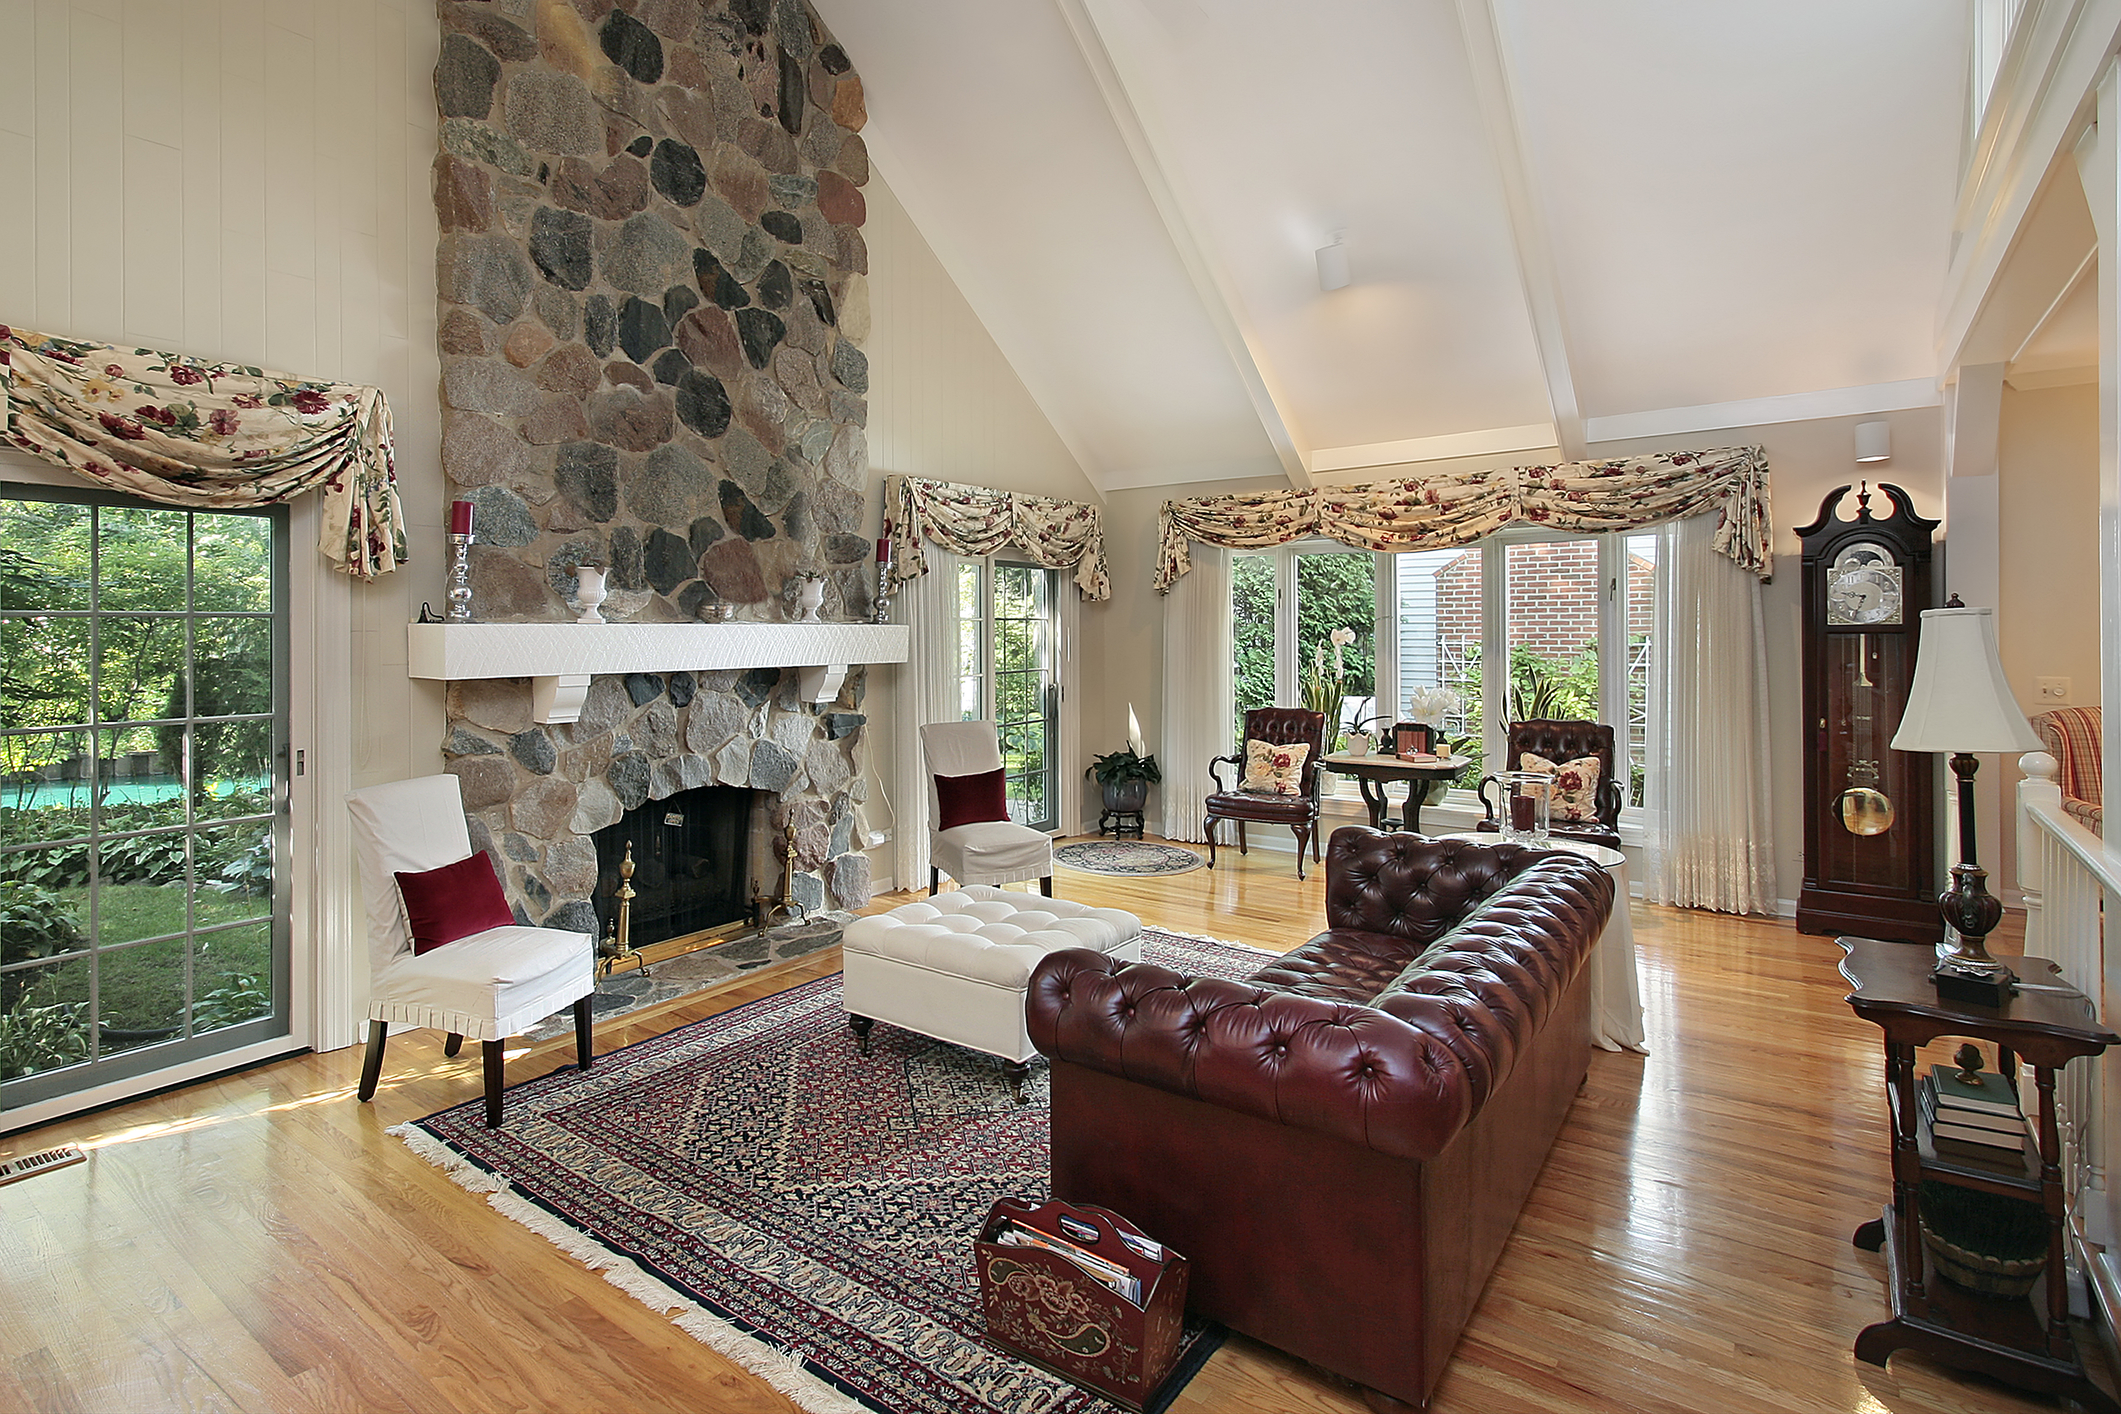 Living room with stone fireplace